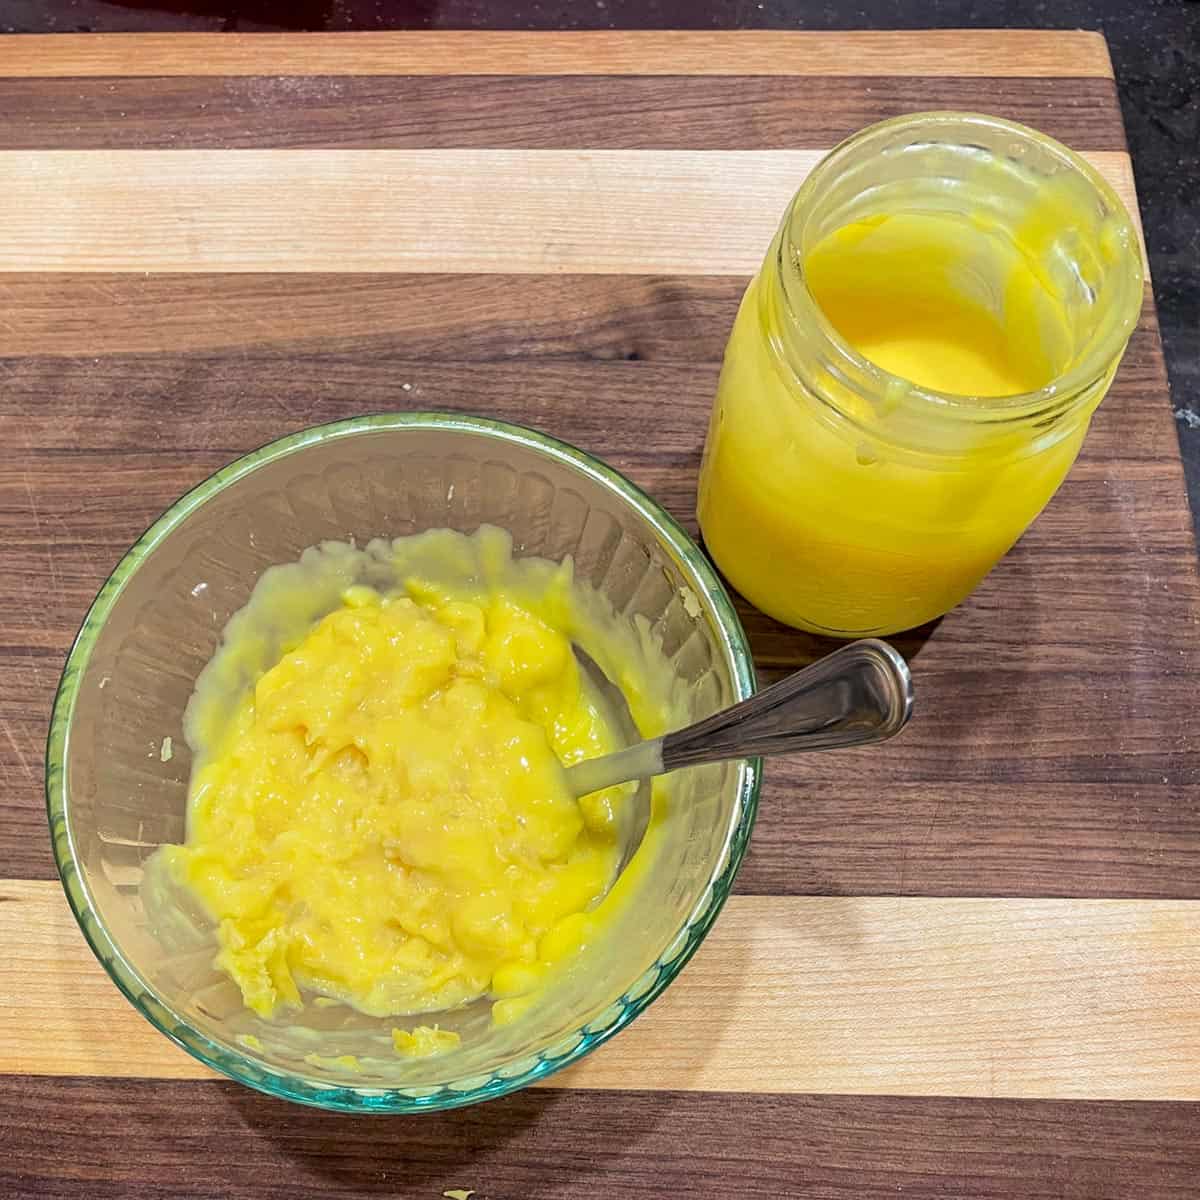 Pineapple curd mixed with crushed pineapple in a glass bowl.